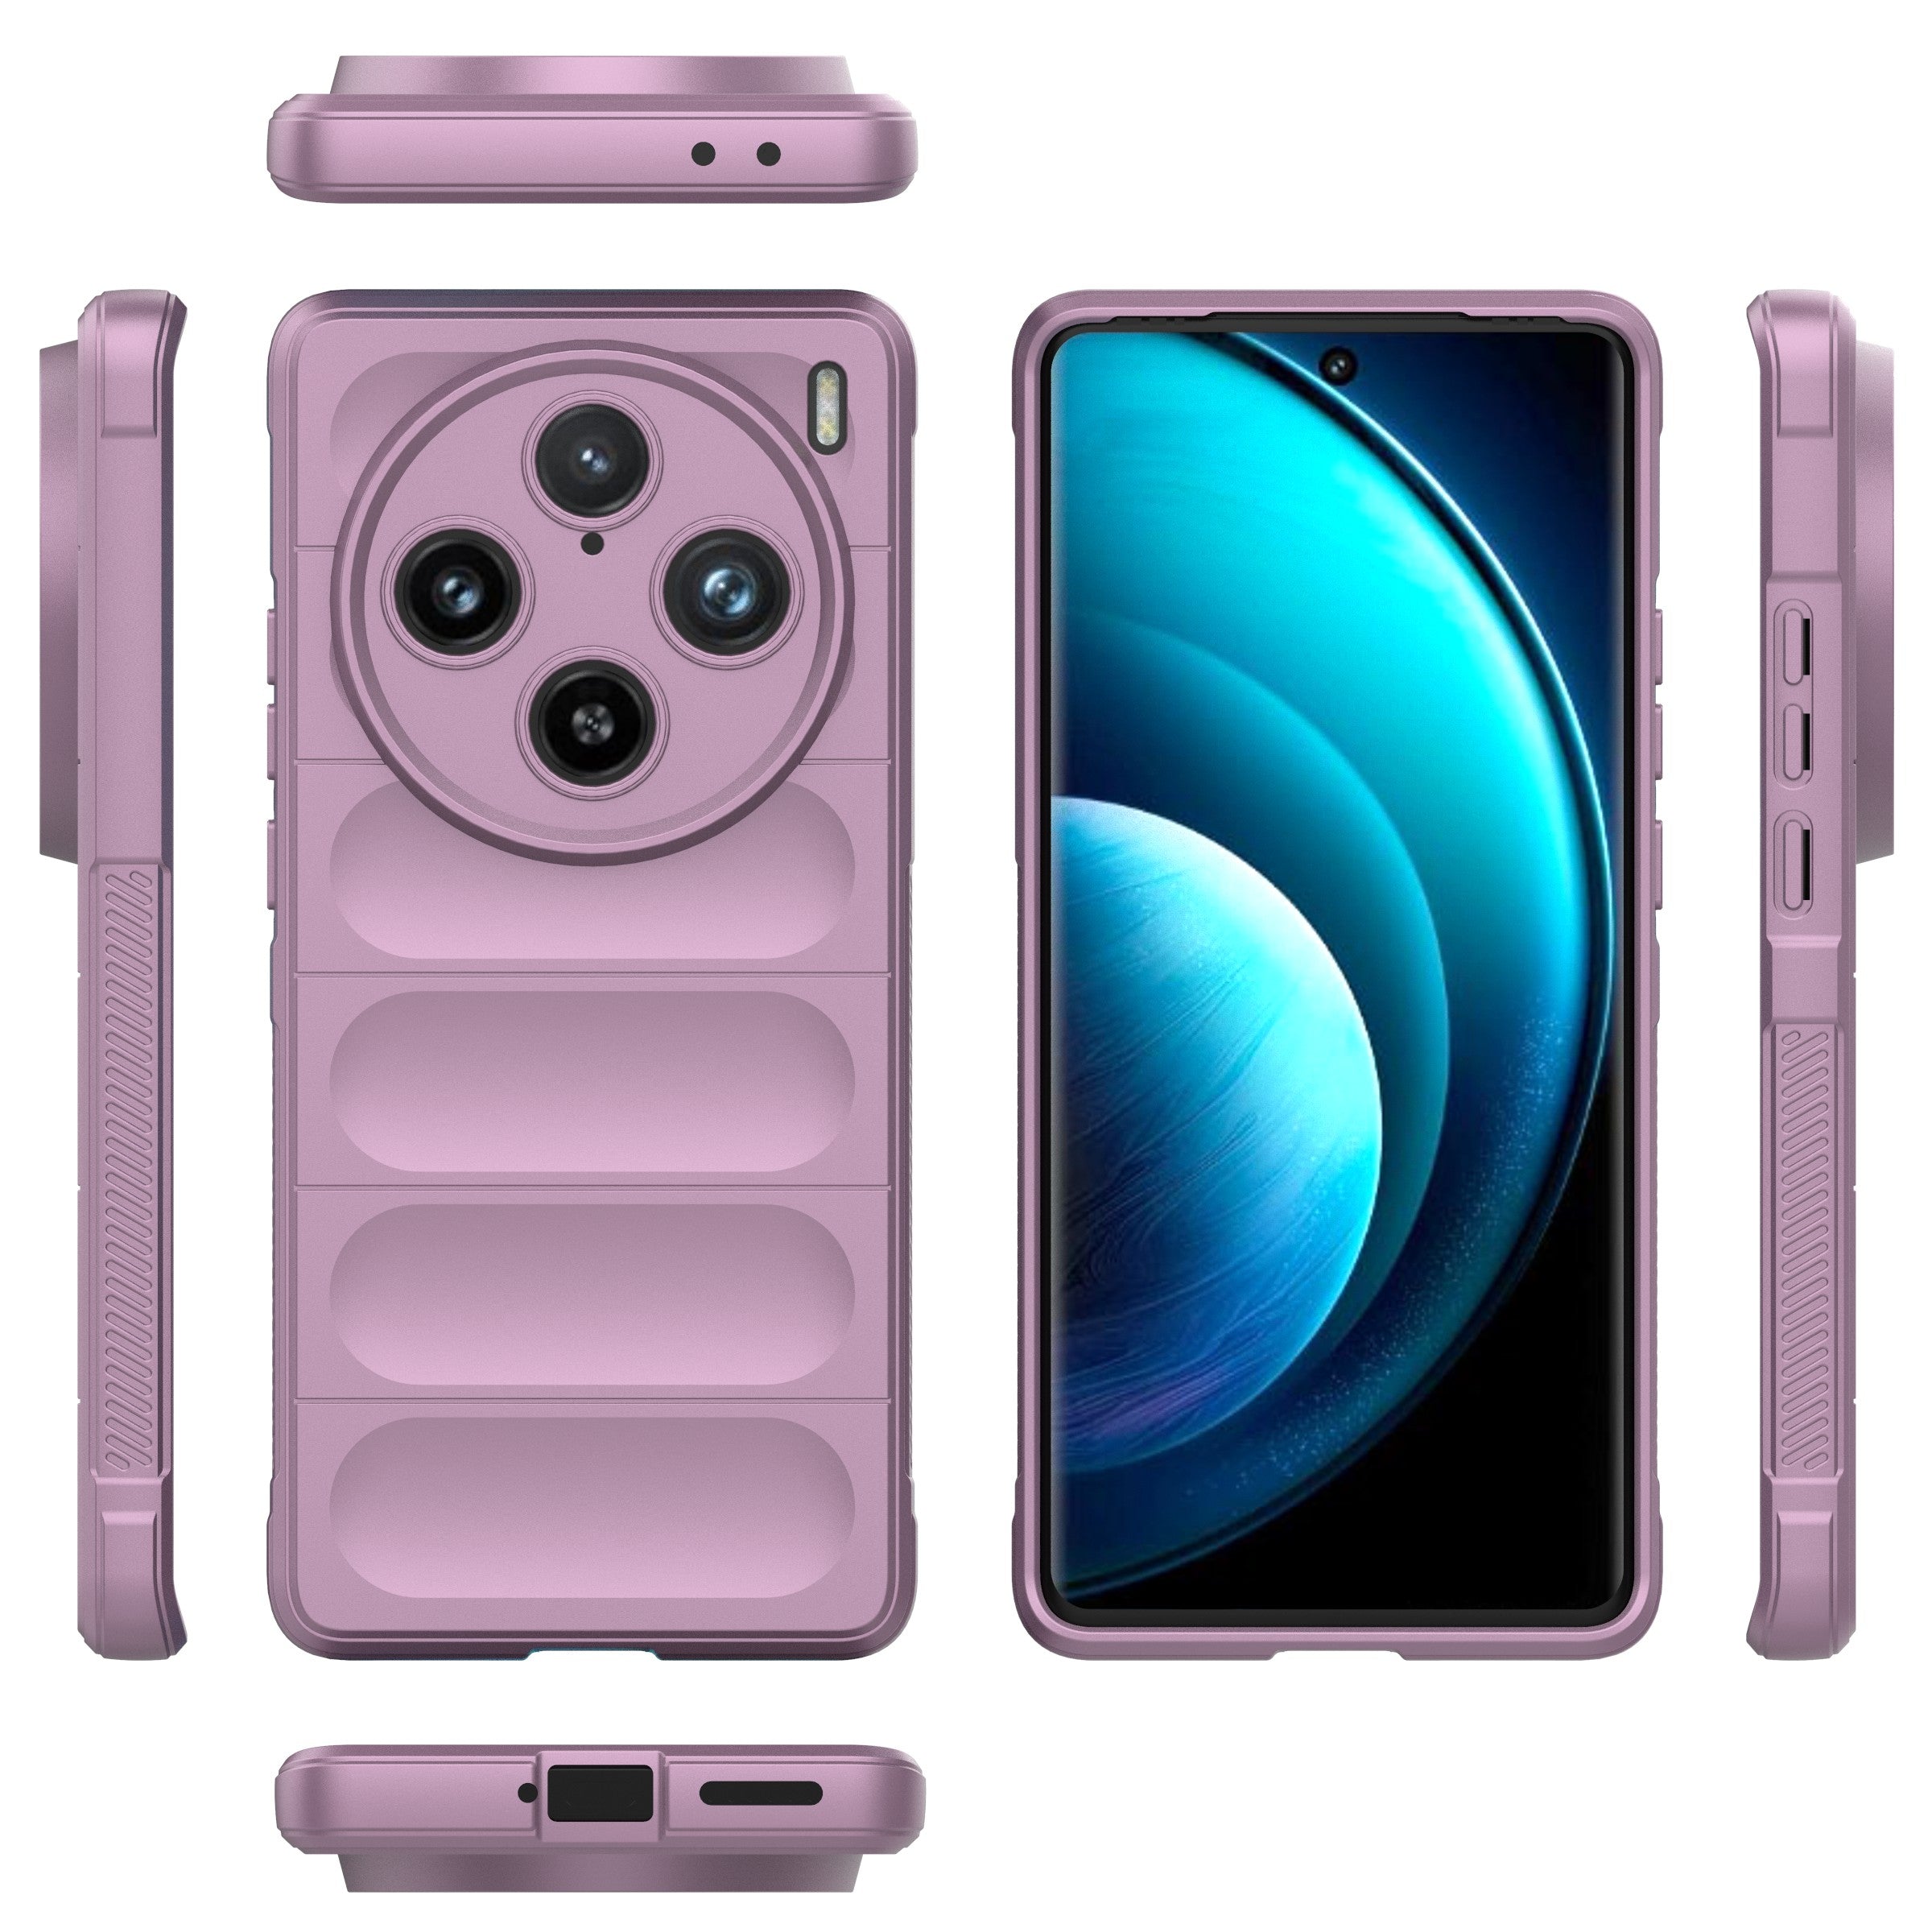 For vivo X100 Pro 5G Case Soft TPU Back Shell Rugged Cell Phone Protector Cover - Light Purple